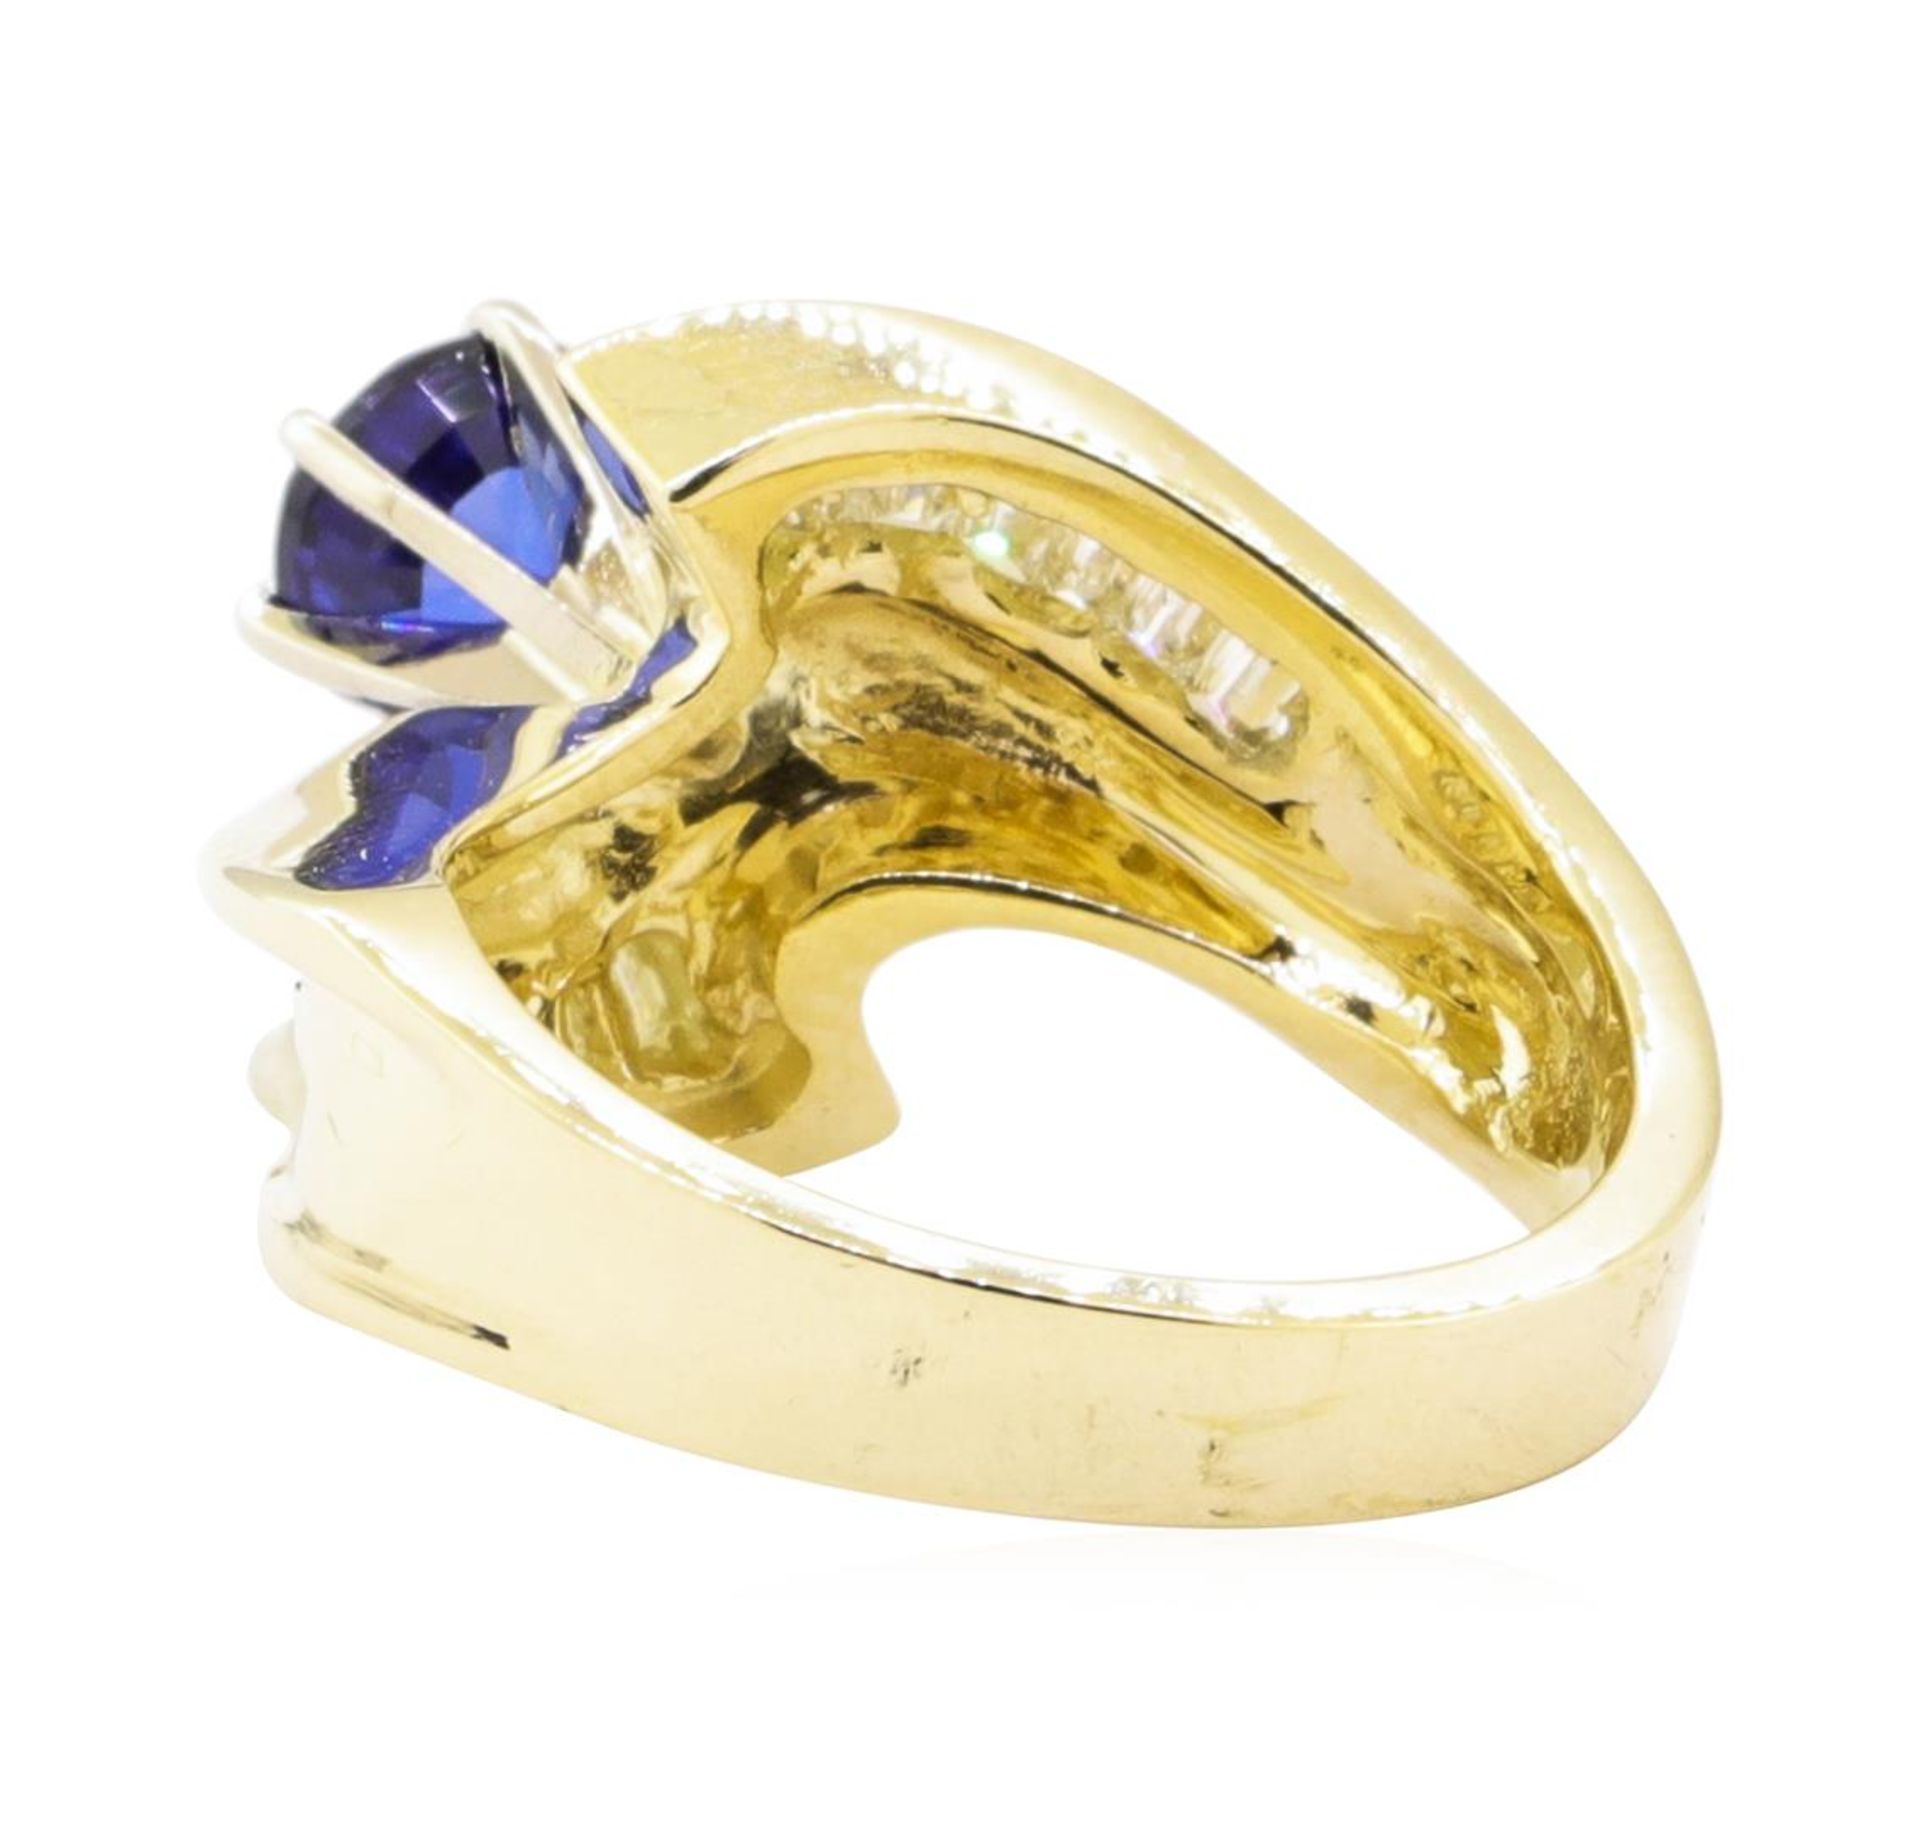 1.51 ctw Blue Sapphire And Diamond Ring - 14KT Yellow Gold - Image 3 of 5